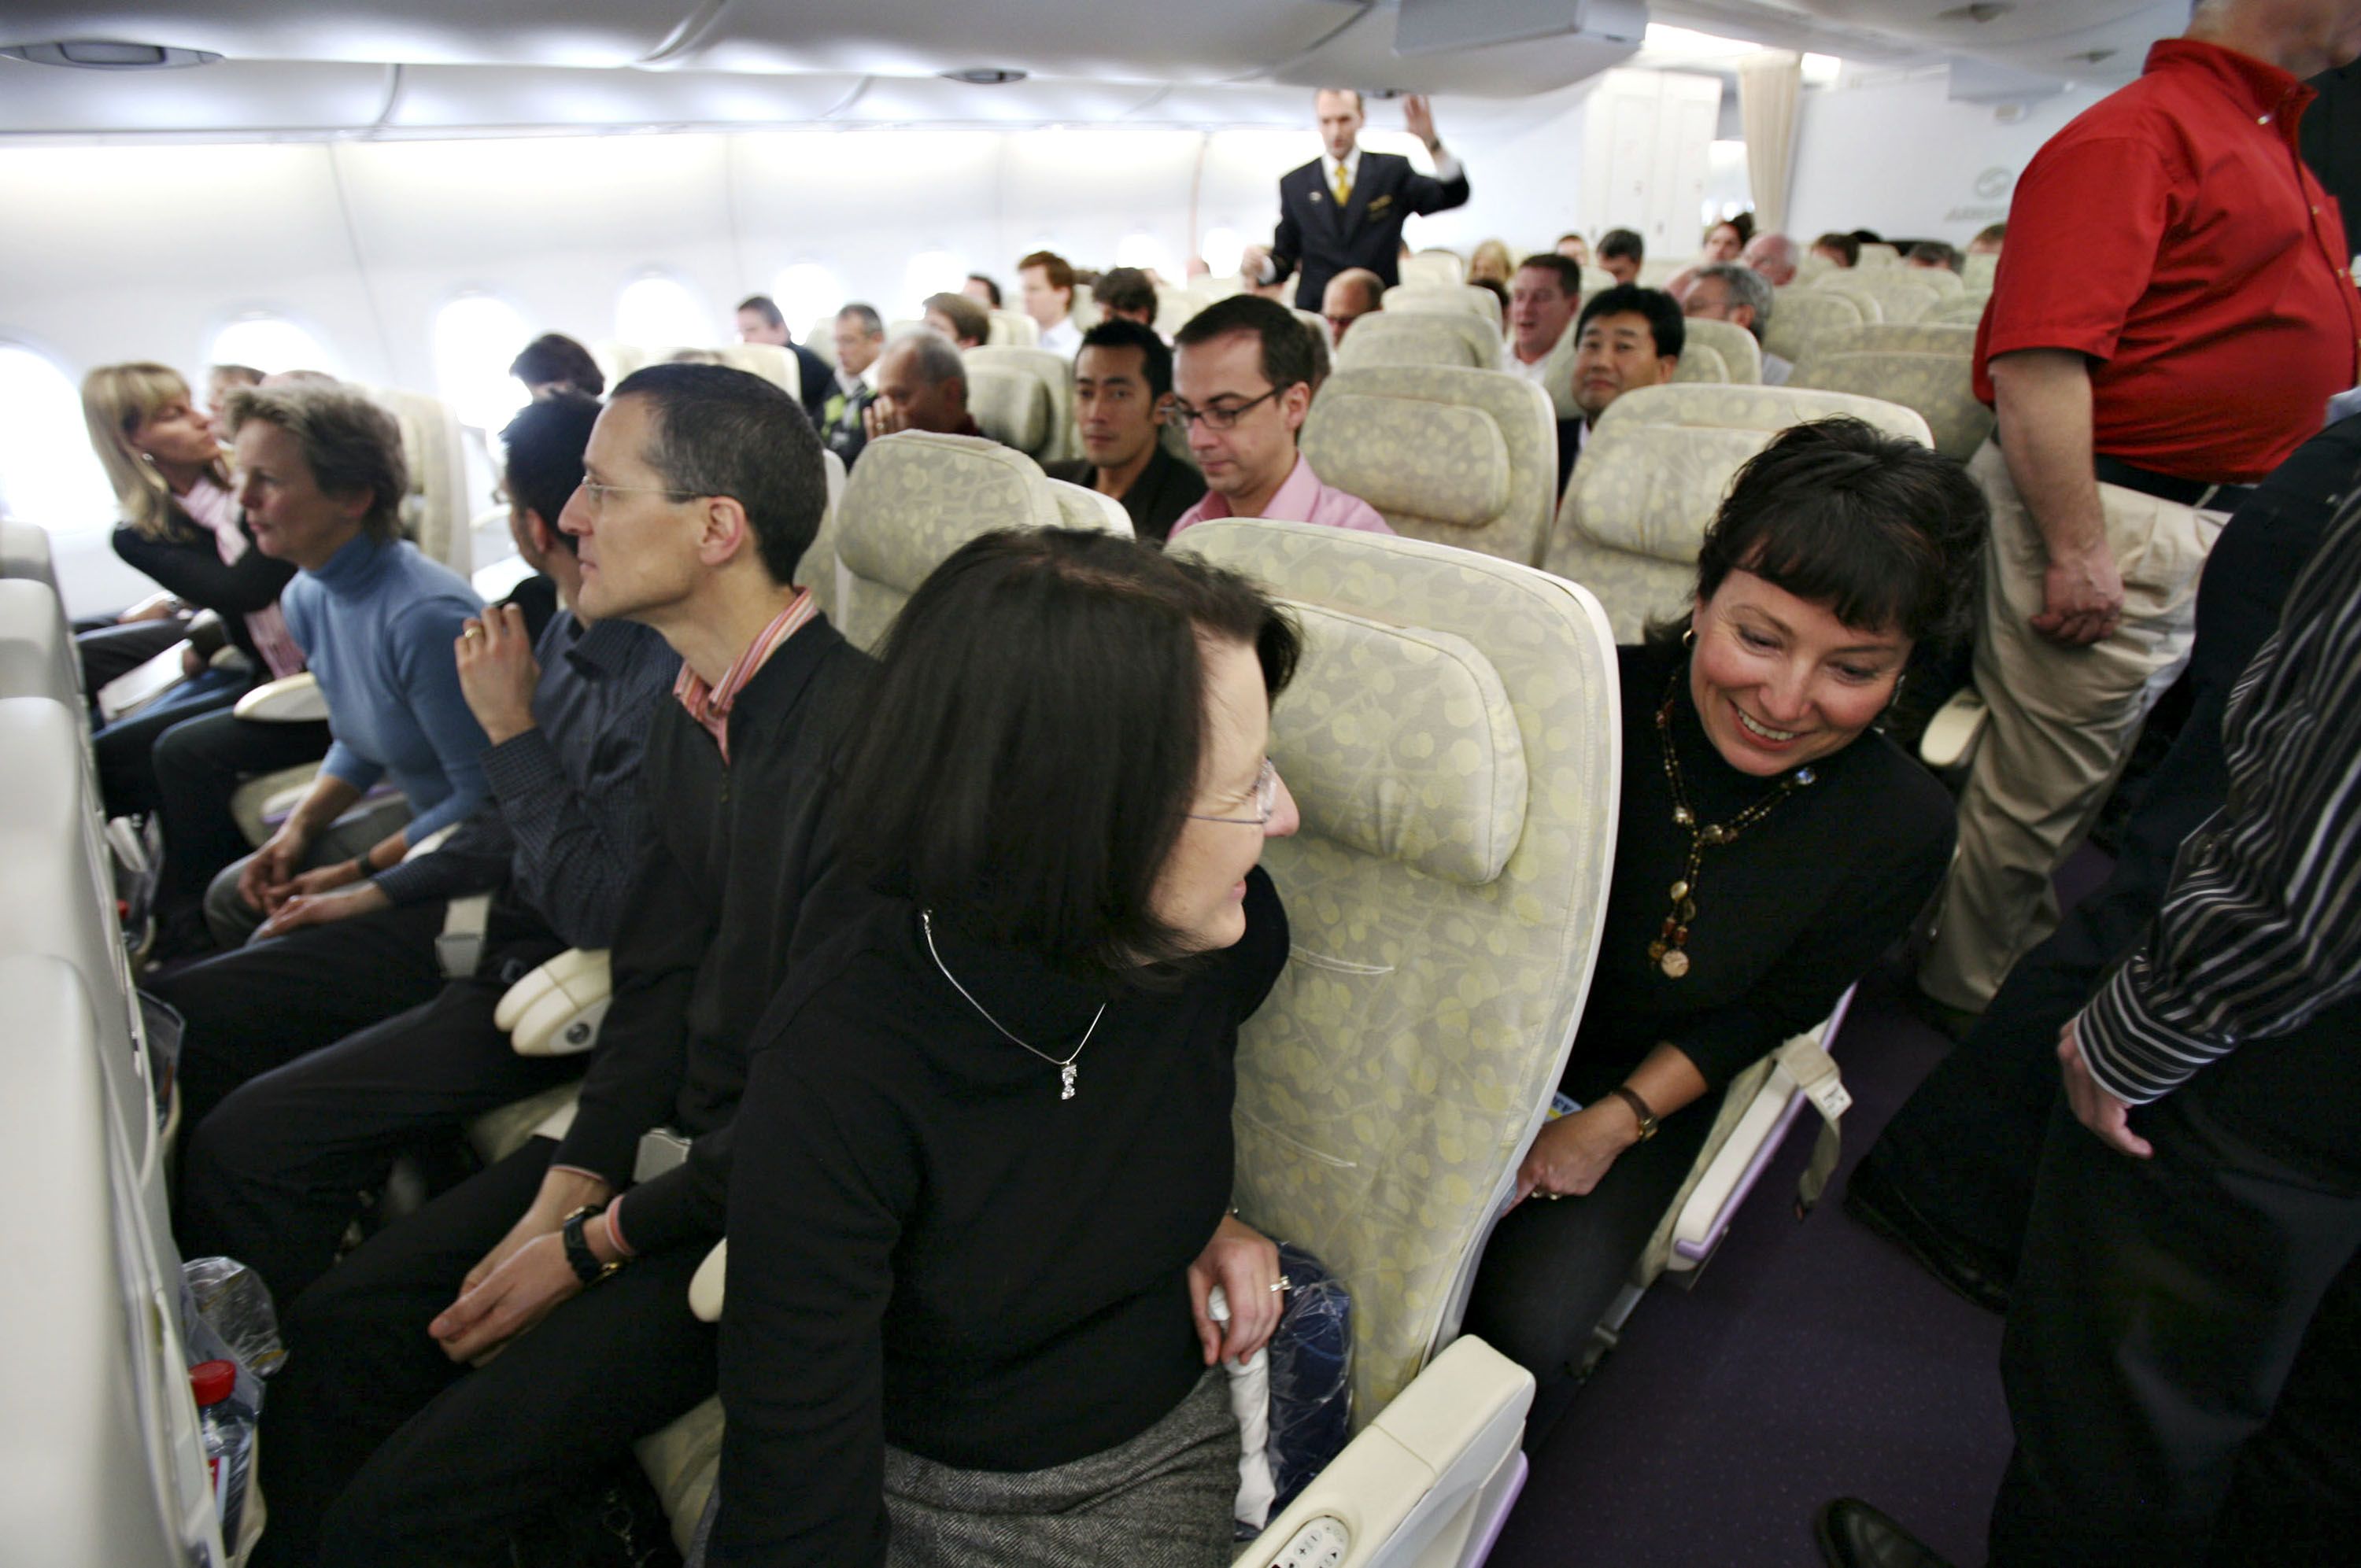 Congress Considers Weighing in on Airline Seat Sizes - ABC News